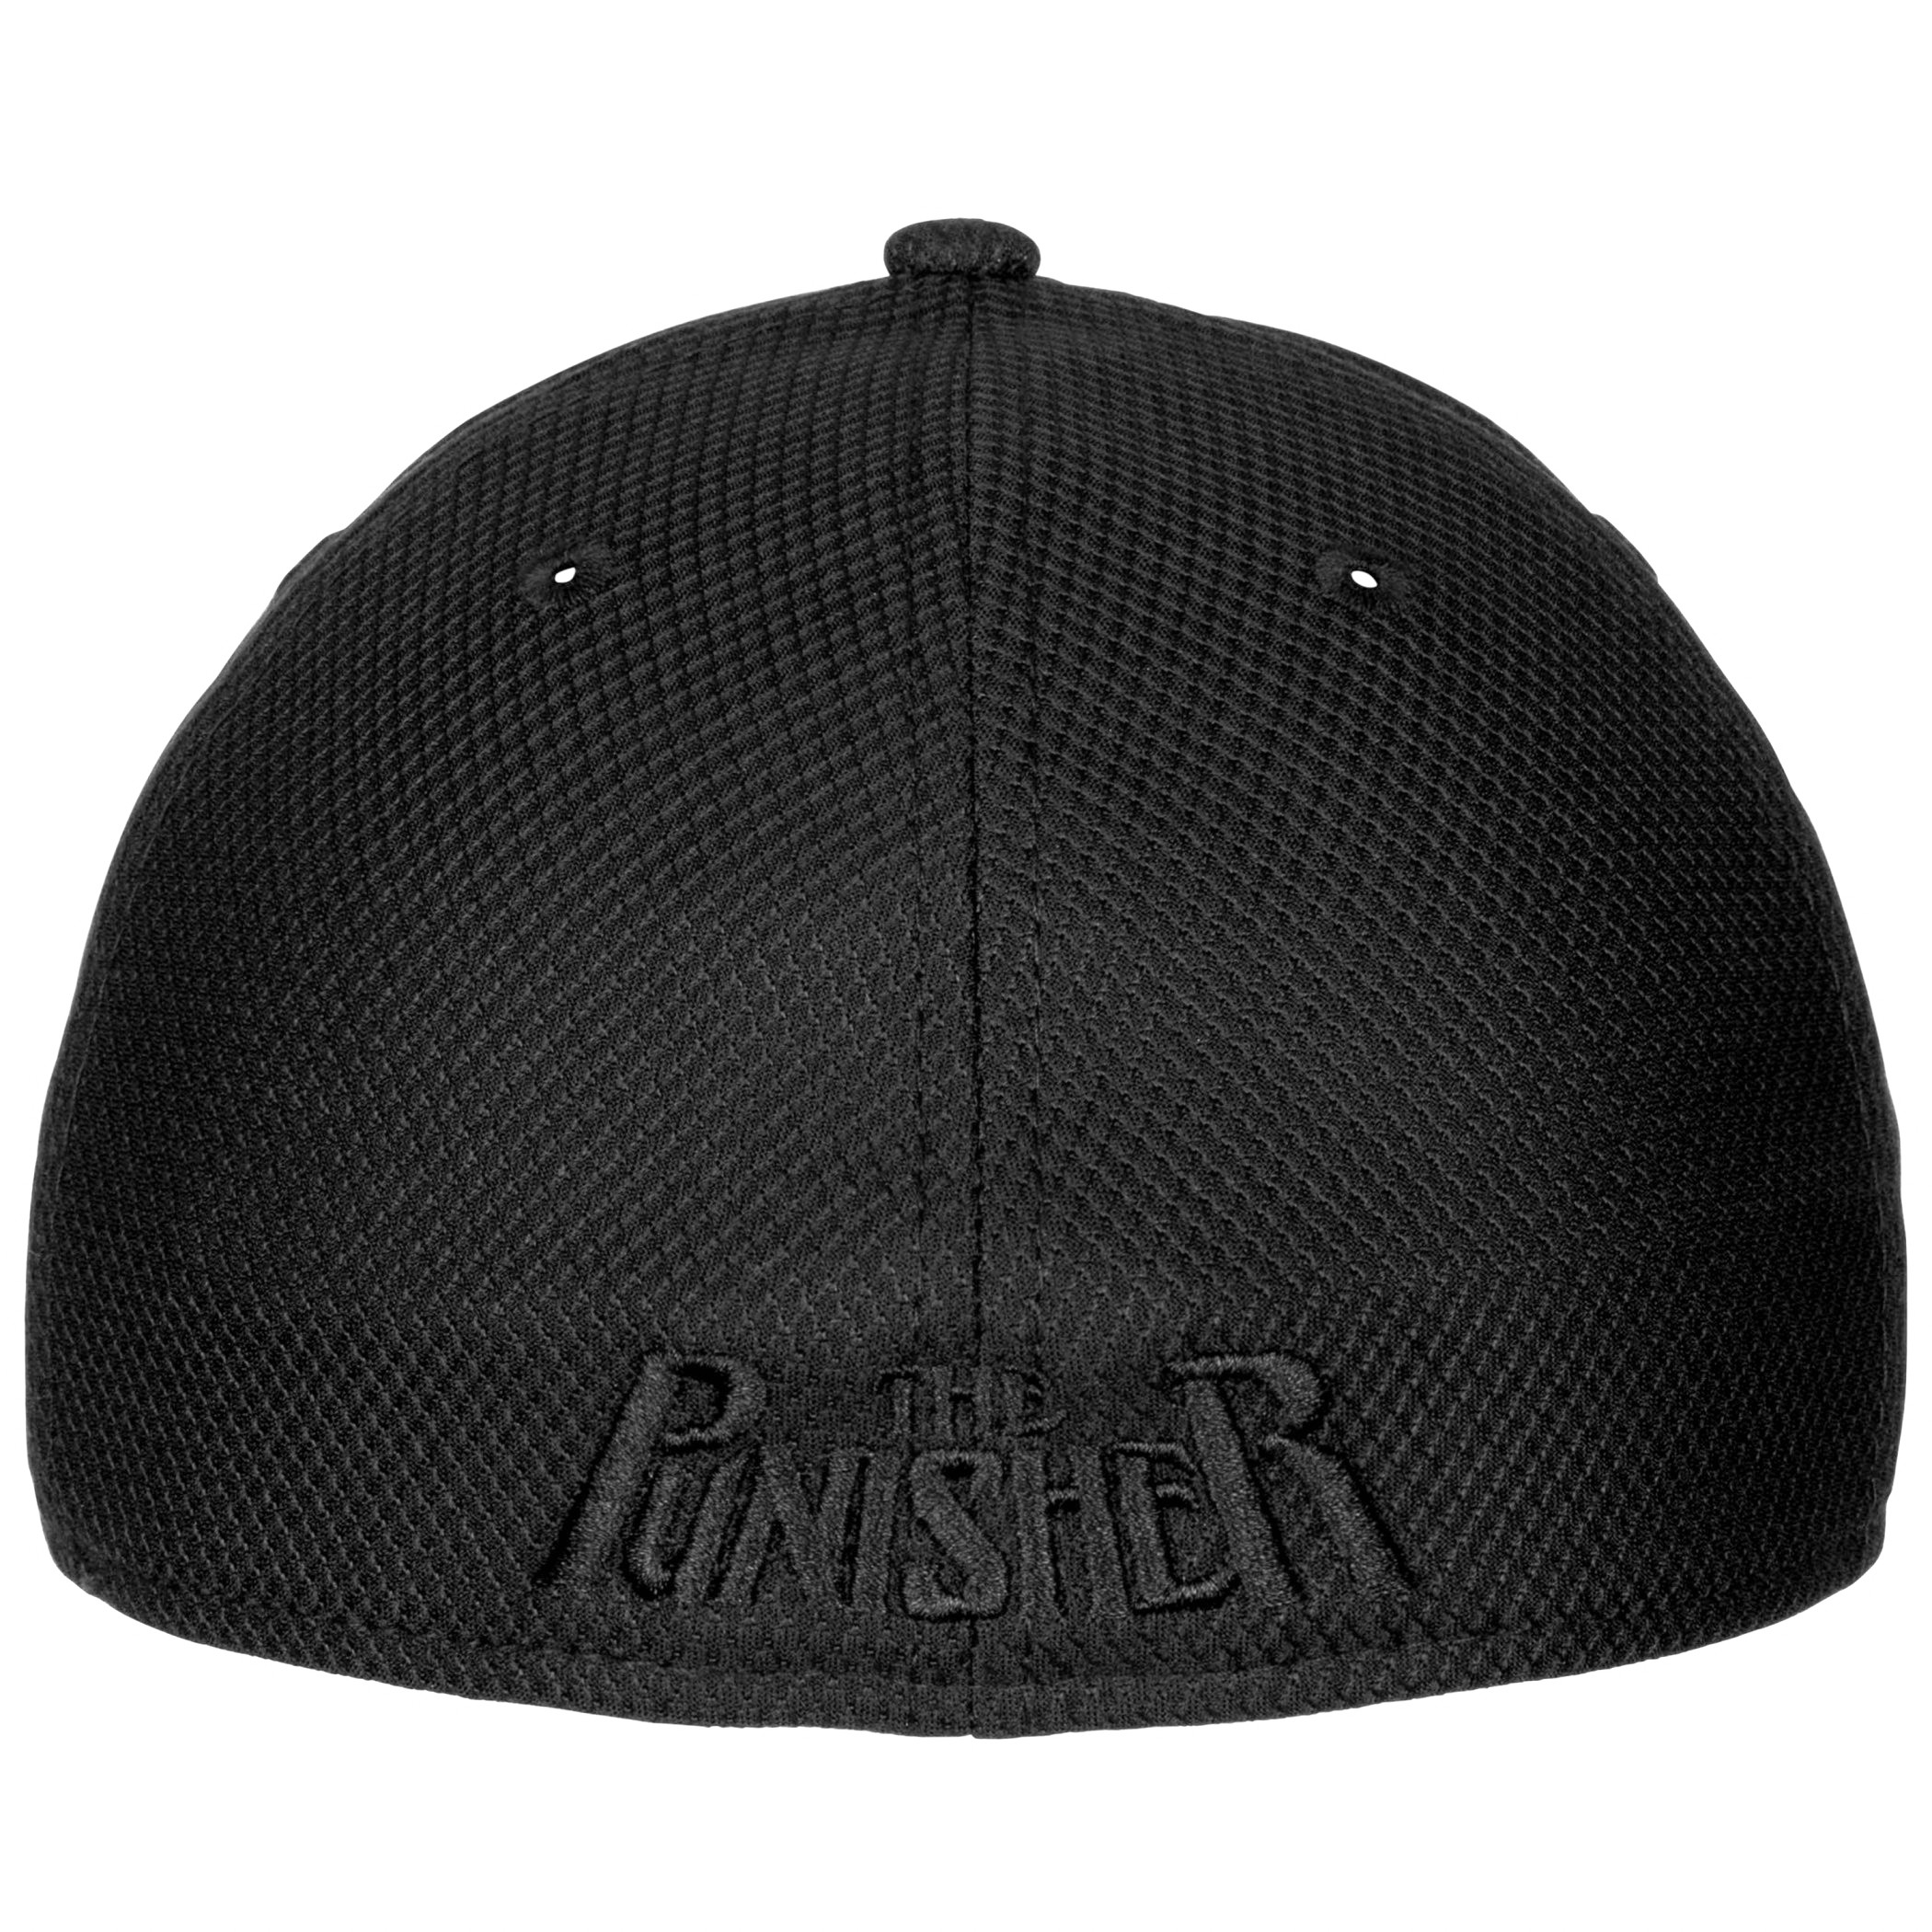 The Punisher Symbol Black on Black New Era 39Thirty Fitted Hat